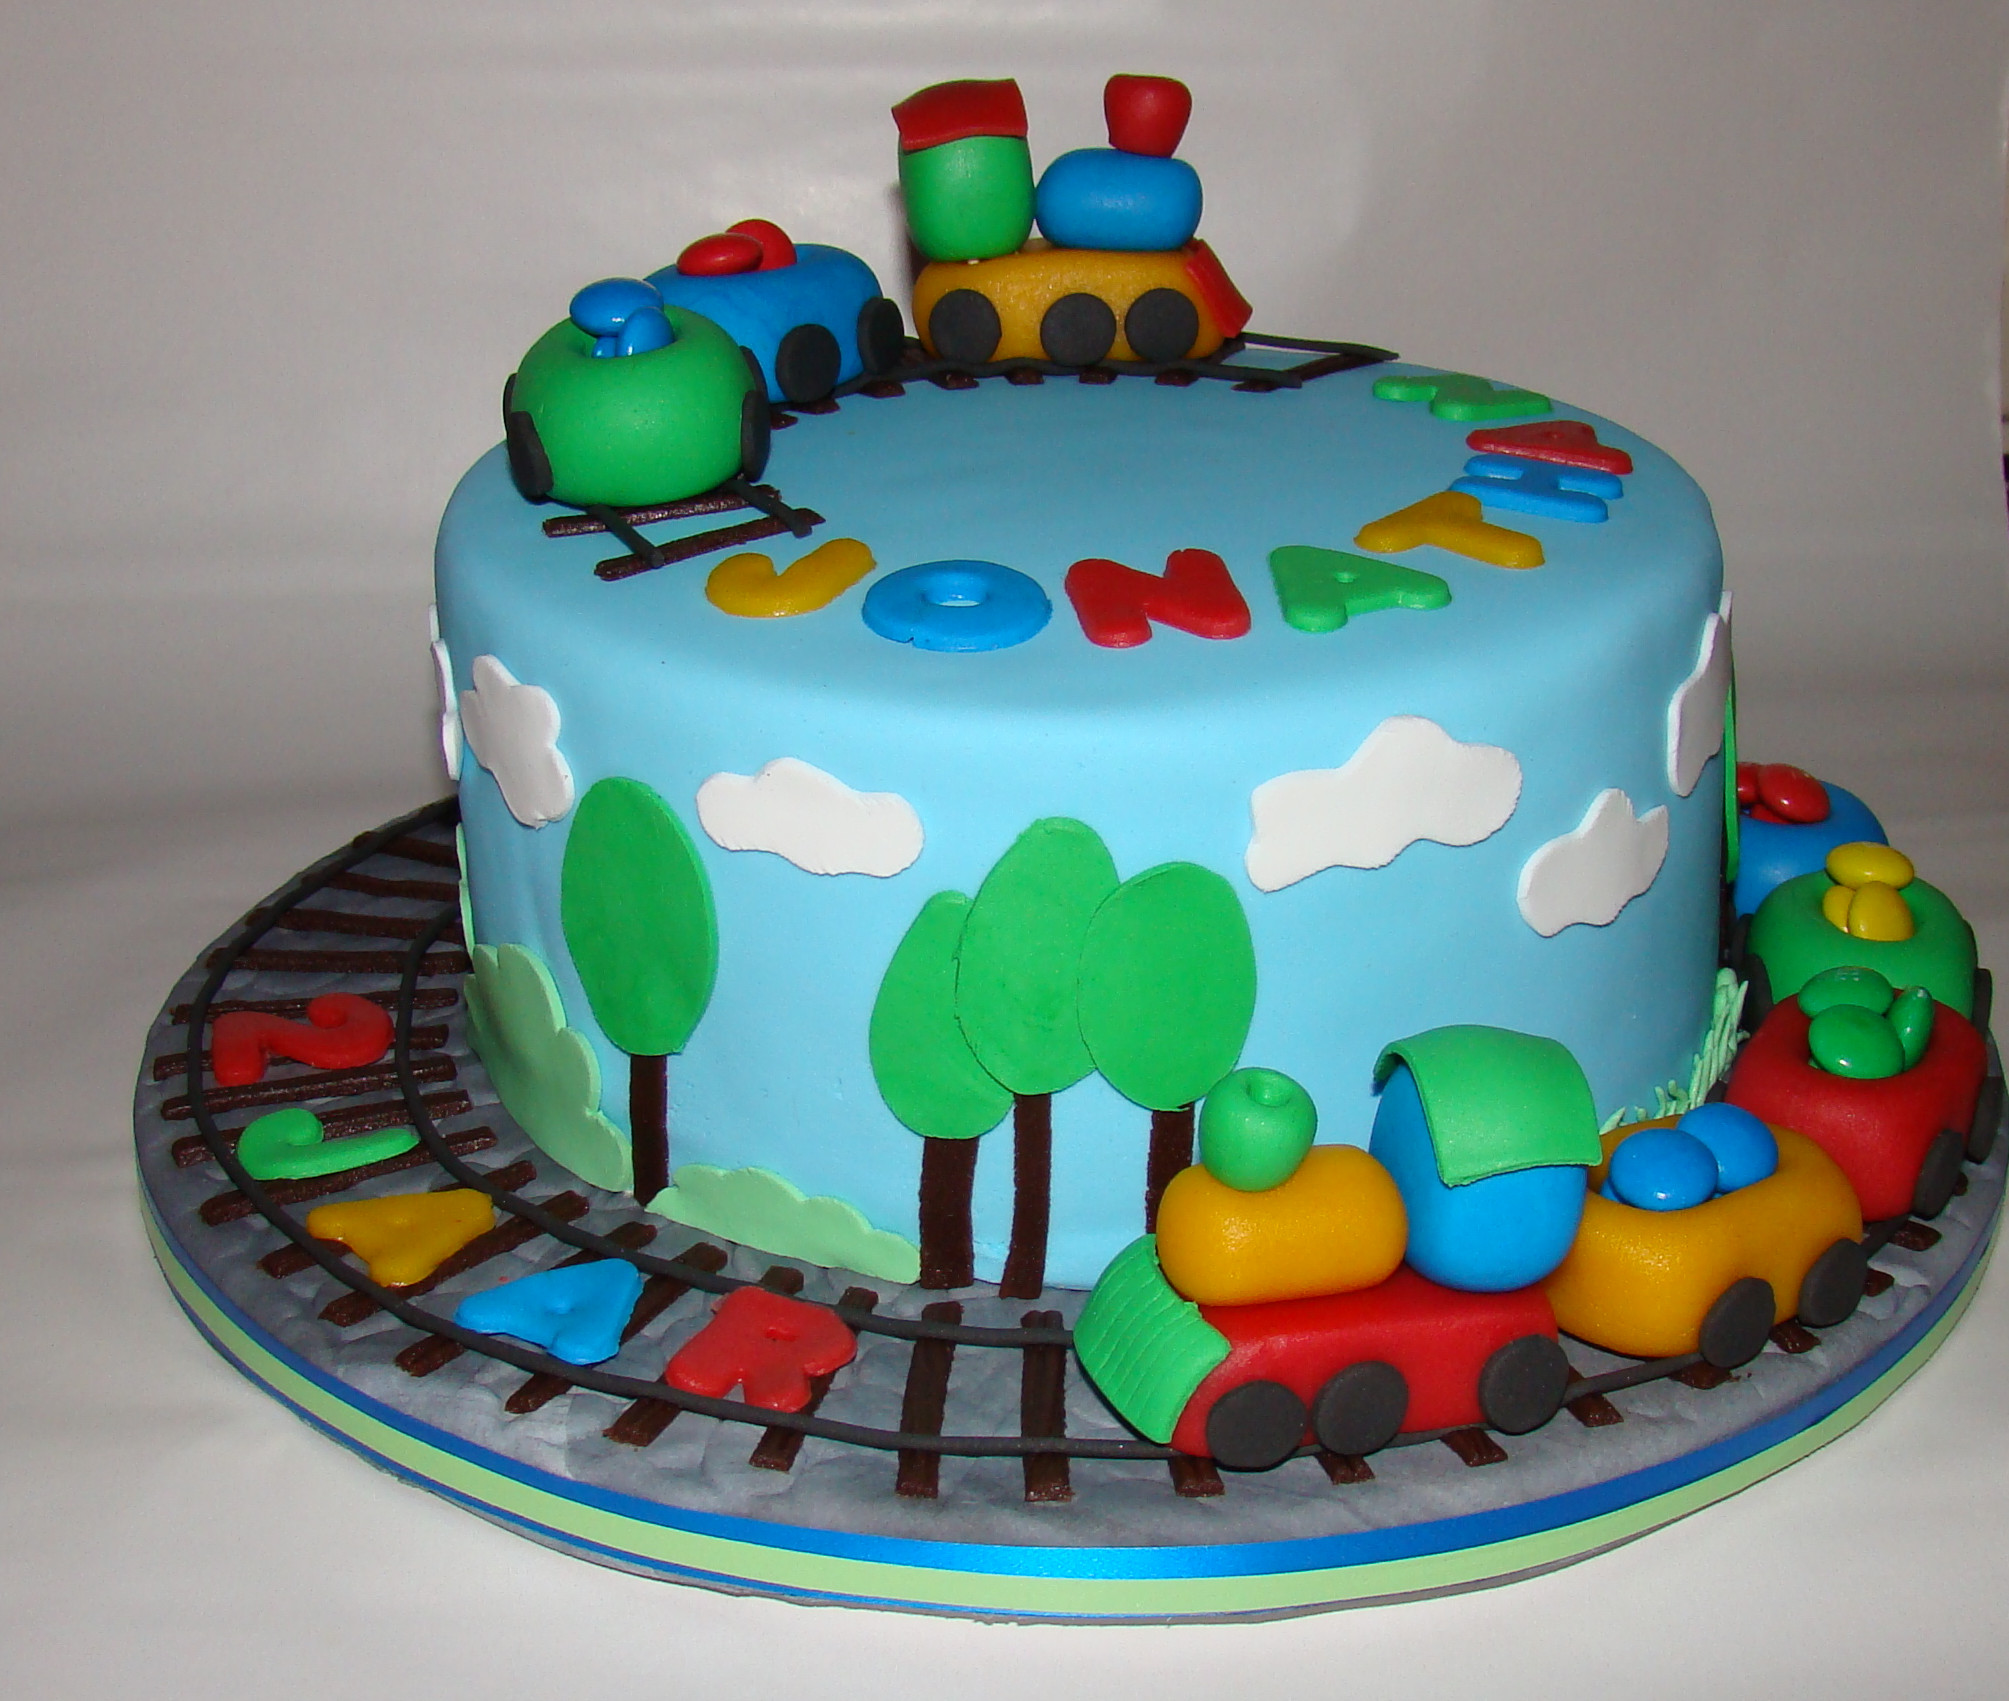 2 Year Old Birthday Cakes
 Traincake For A Two Years Old Boy CakeCentral